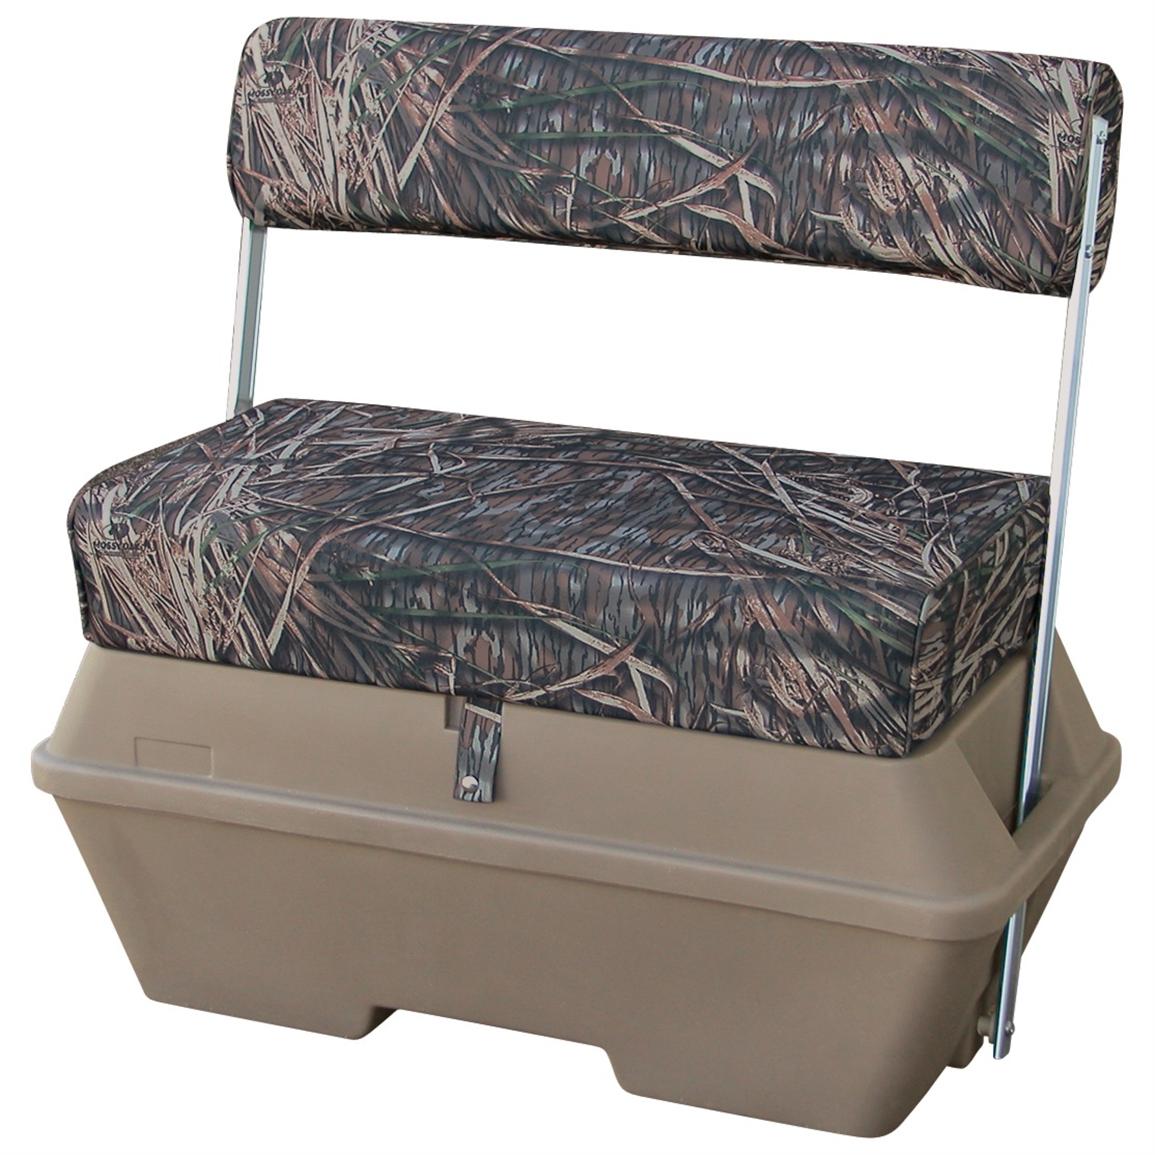 Wise® Duck Boat Bench with Cooler - 204000, Pontoon Seats ...